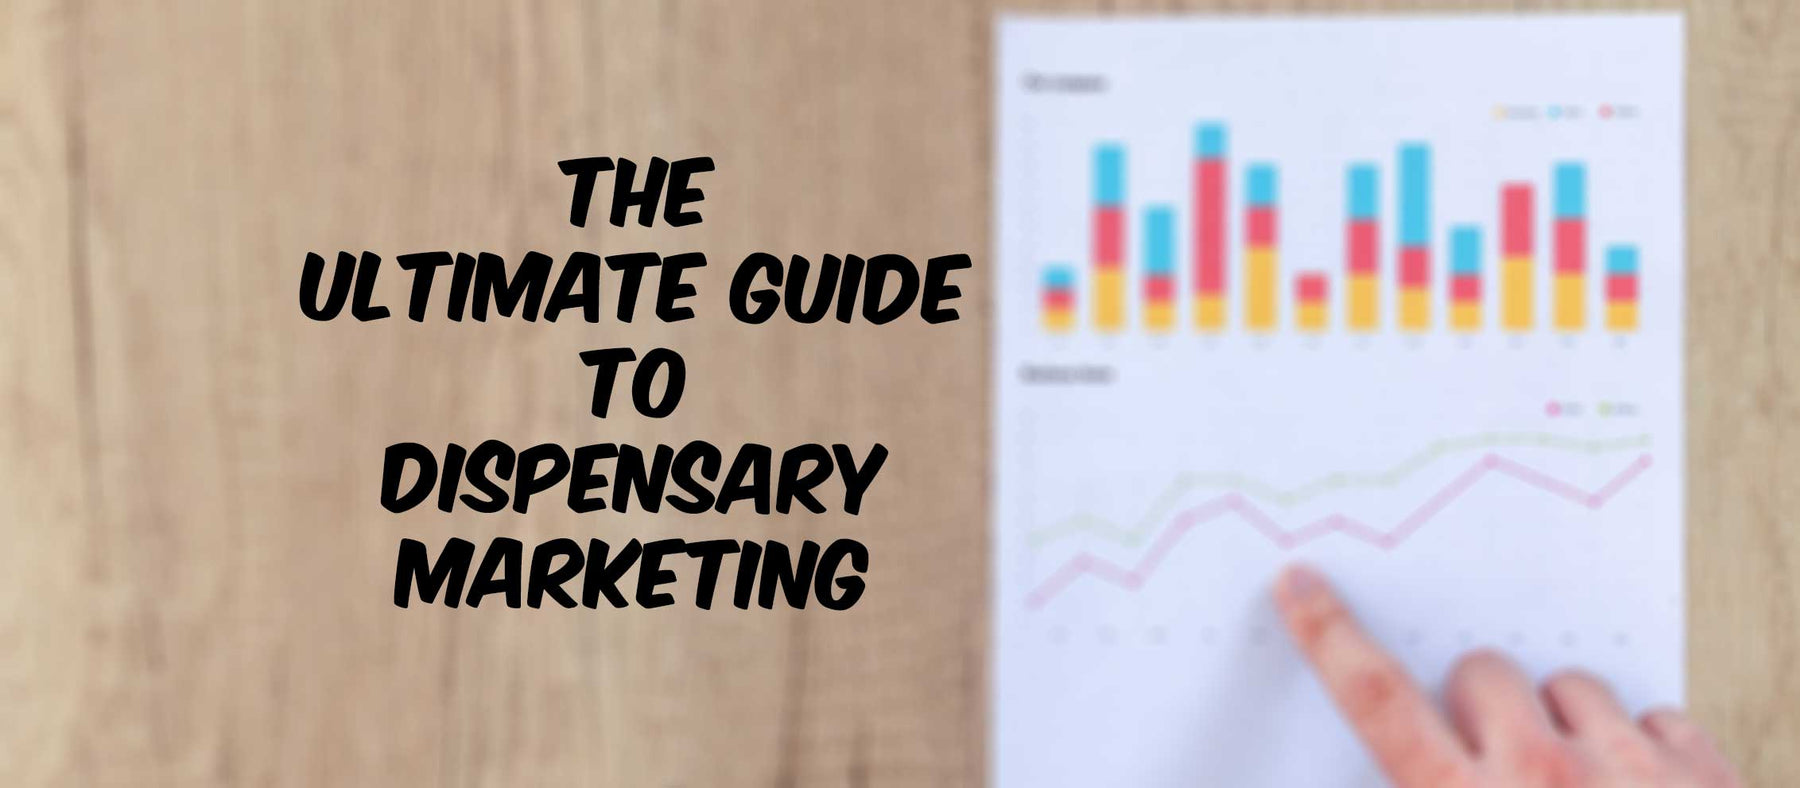 The Ultimate Guide to Dispensary Marketing